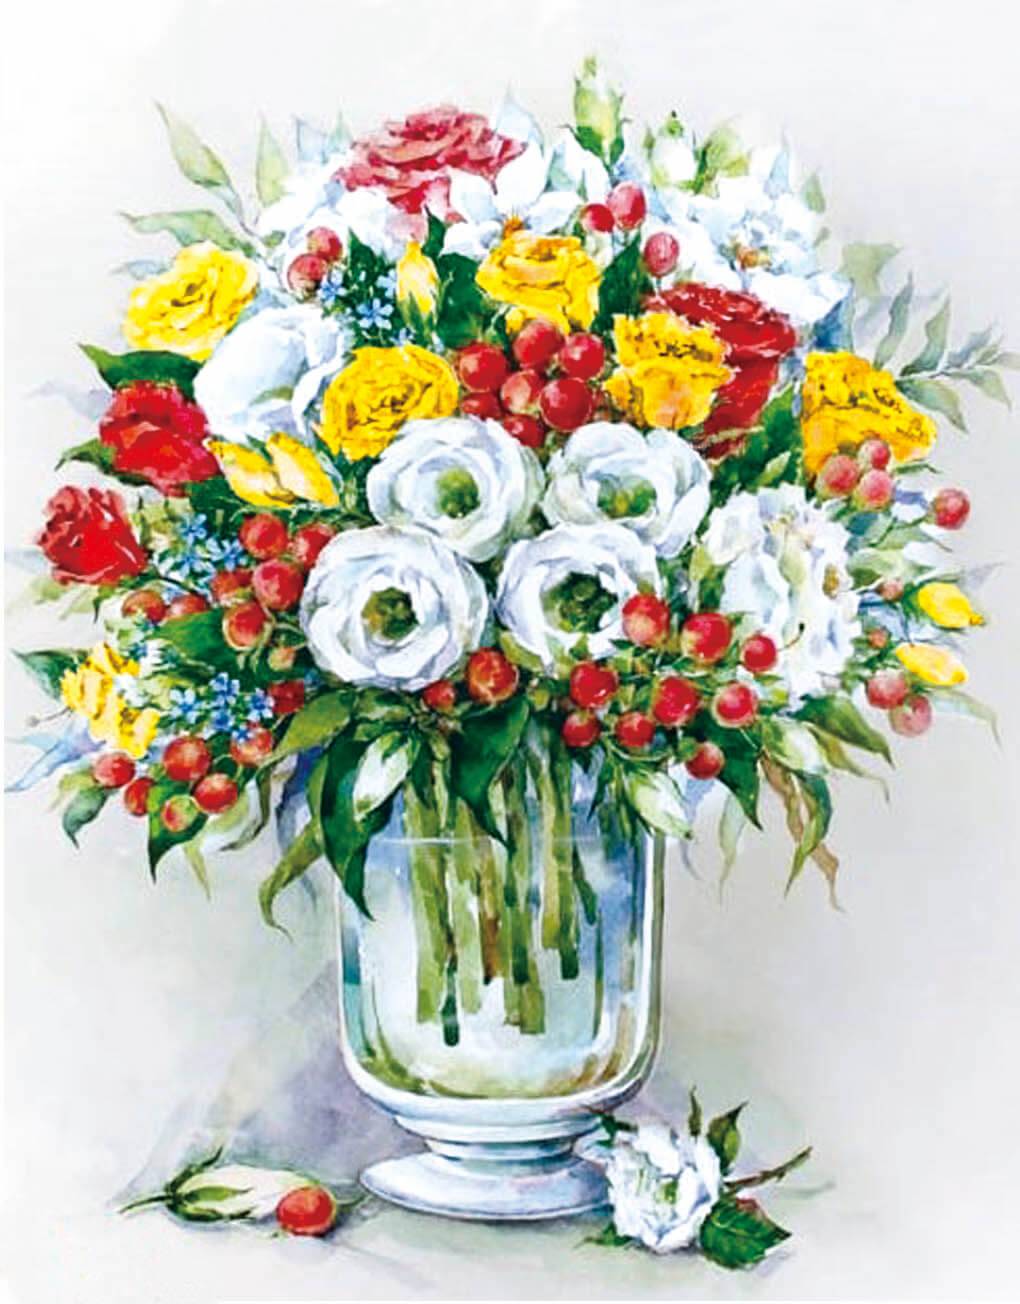 Diamond painting - LG148e - Bouquet with red berries Image 1